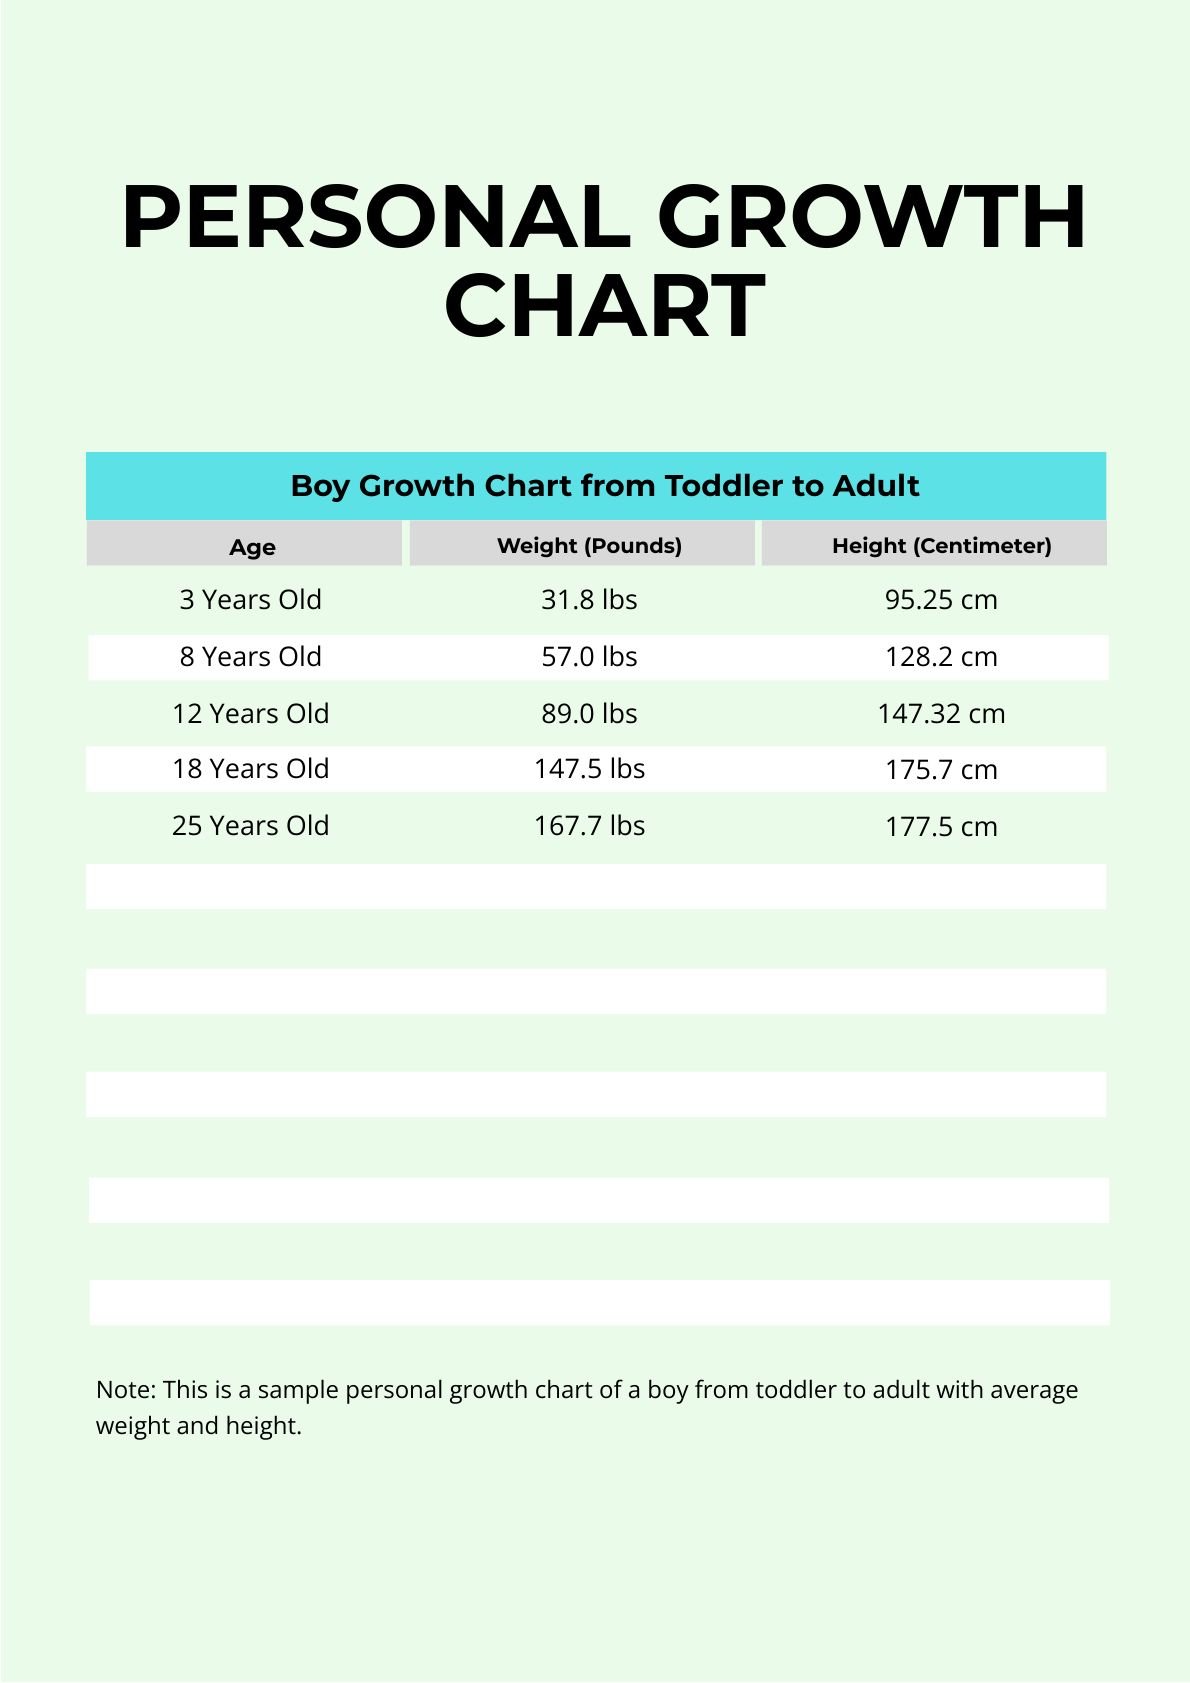 Personal Growth Chart in PDF, Illustrator